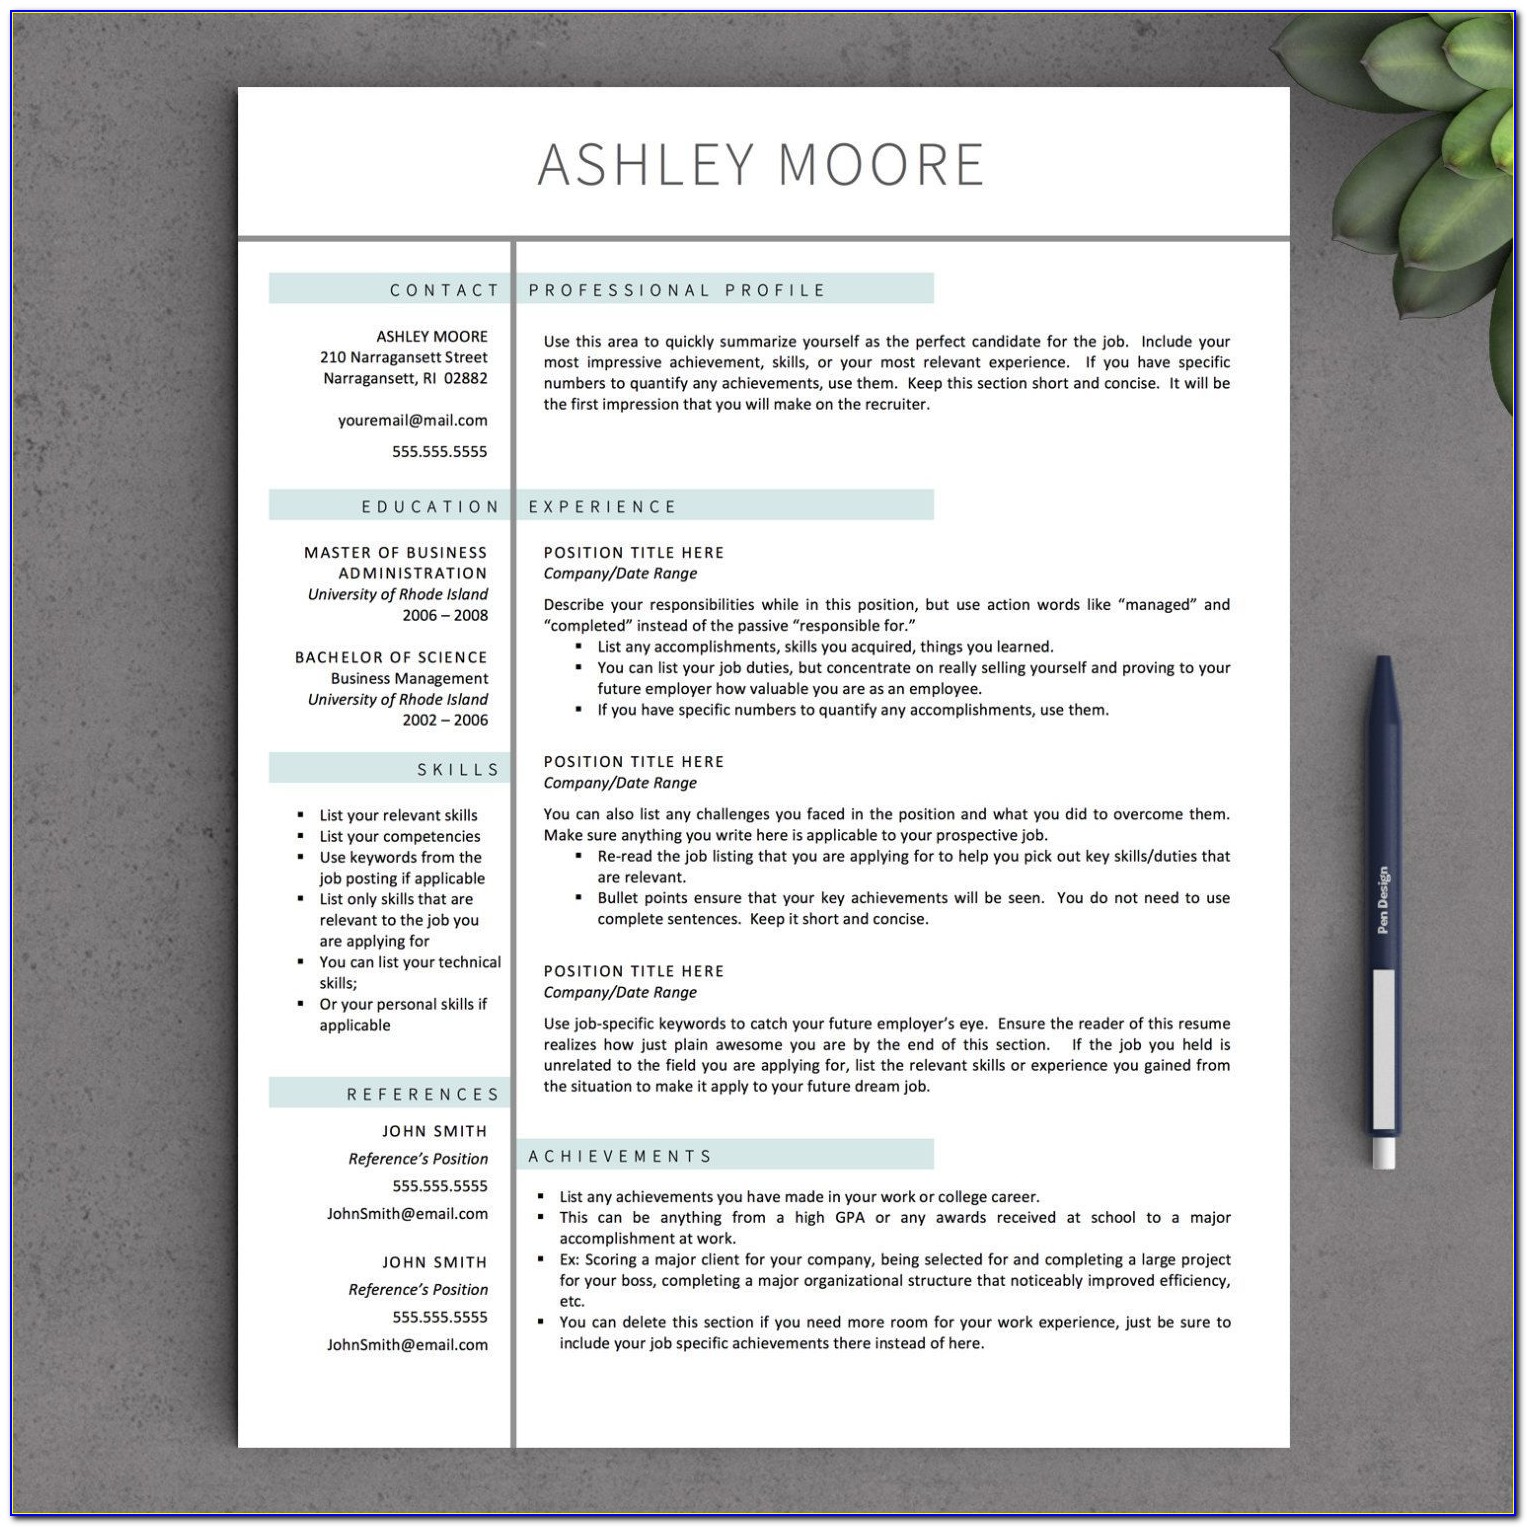 Best Resume For Accountants